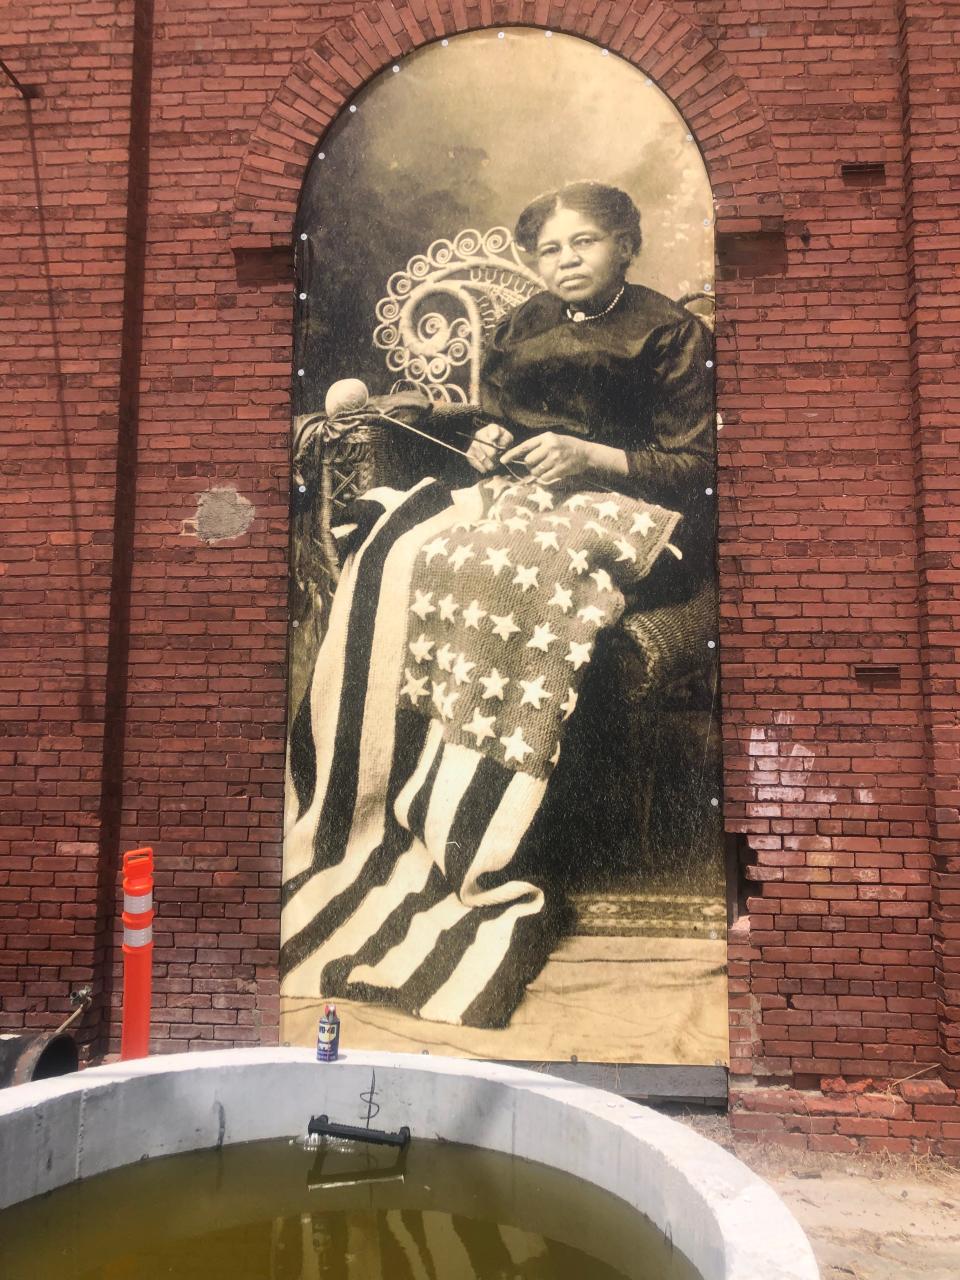 A historic picture hangs on the side of the Water Works building near the Enmarket Arena in west Savannah.